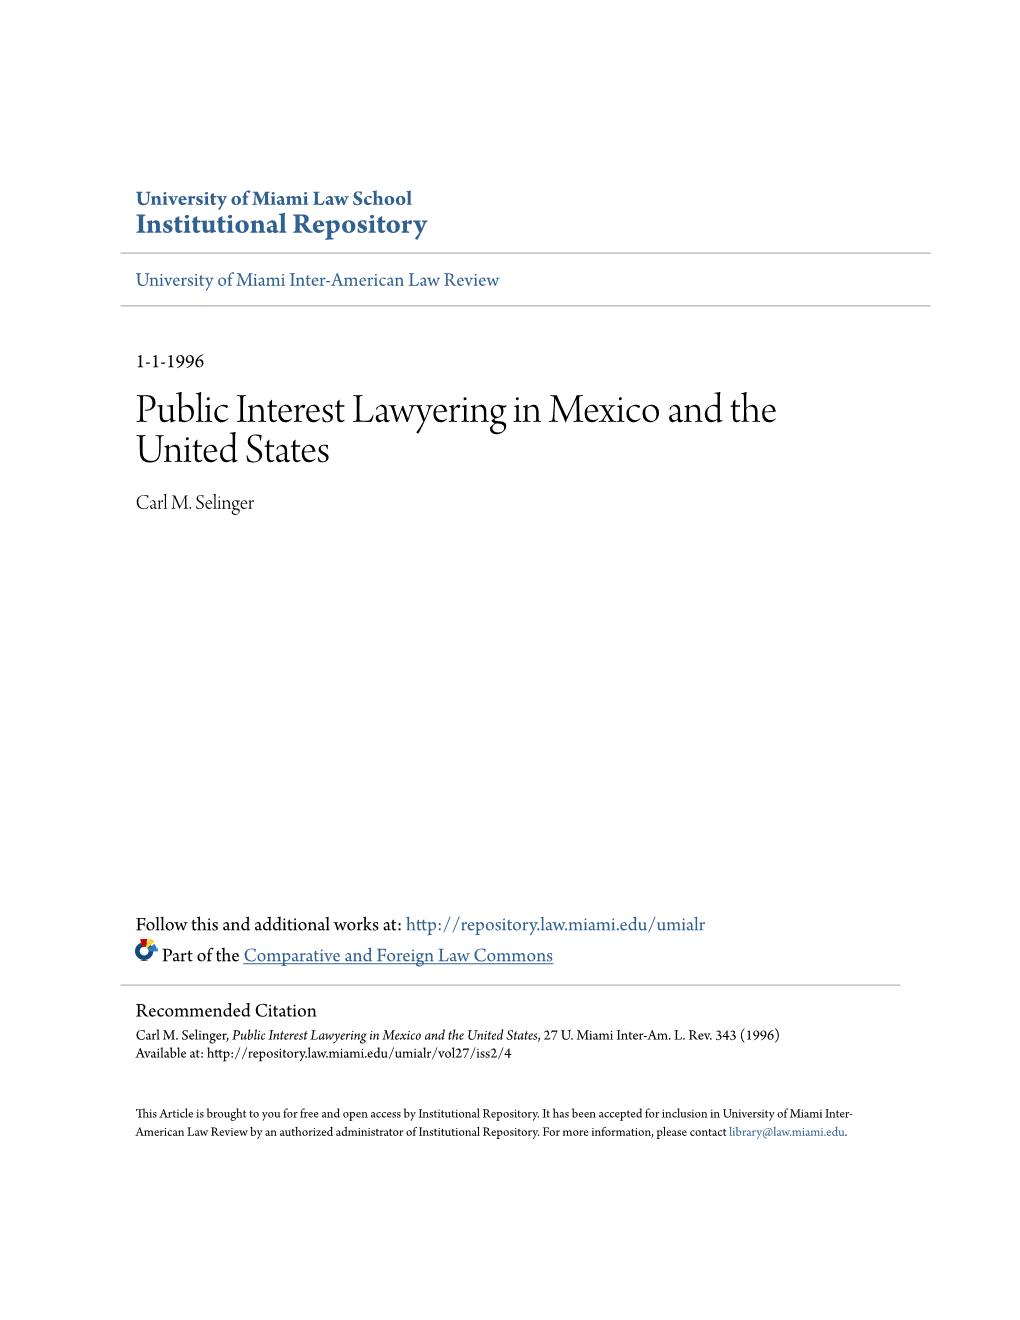 Public Interest Lawyering in Mexico and the United States Carl M